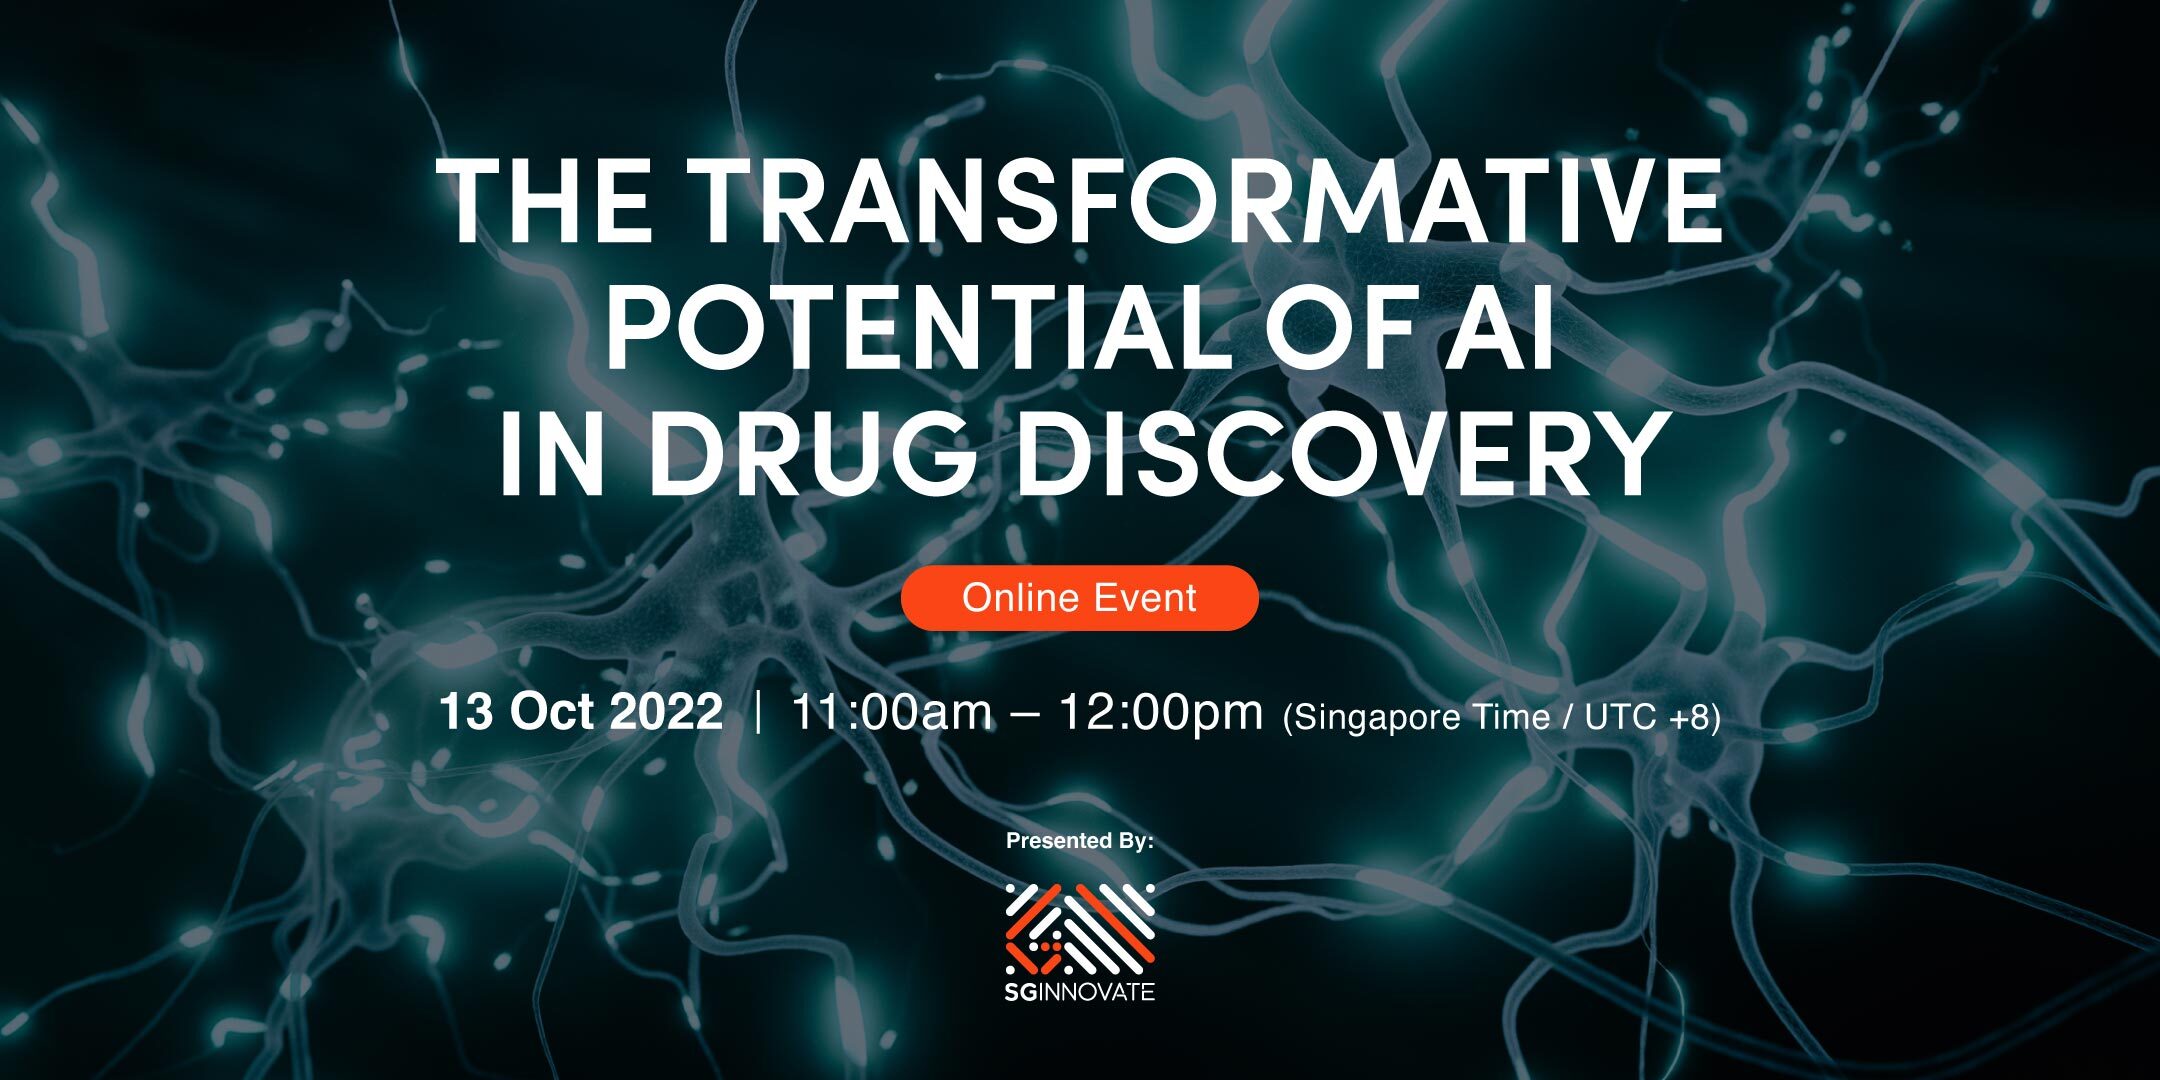 The Transformative Potential of AI in Drug Discovery